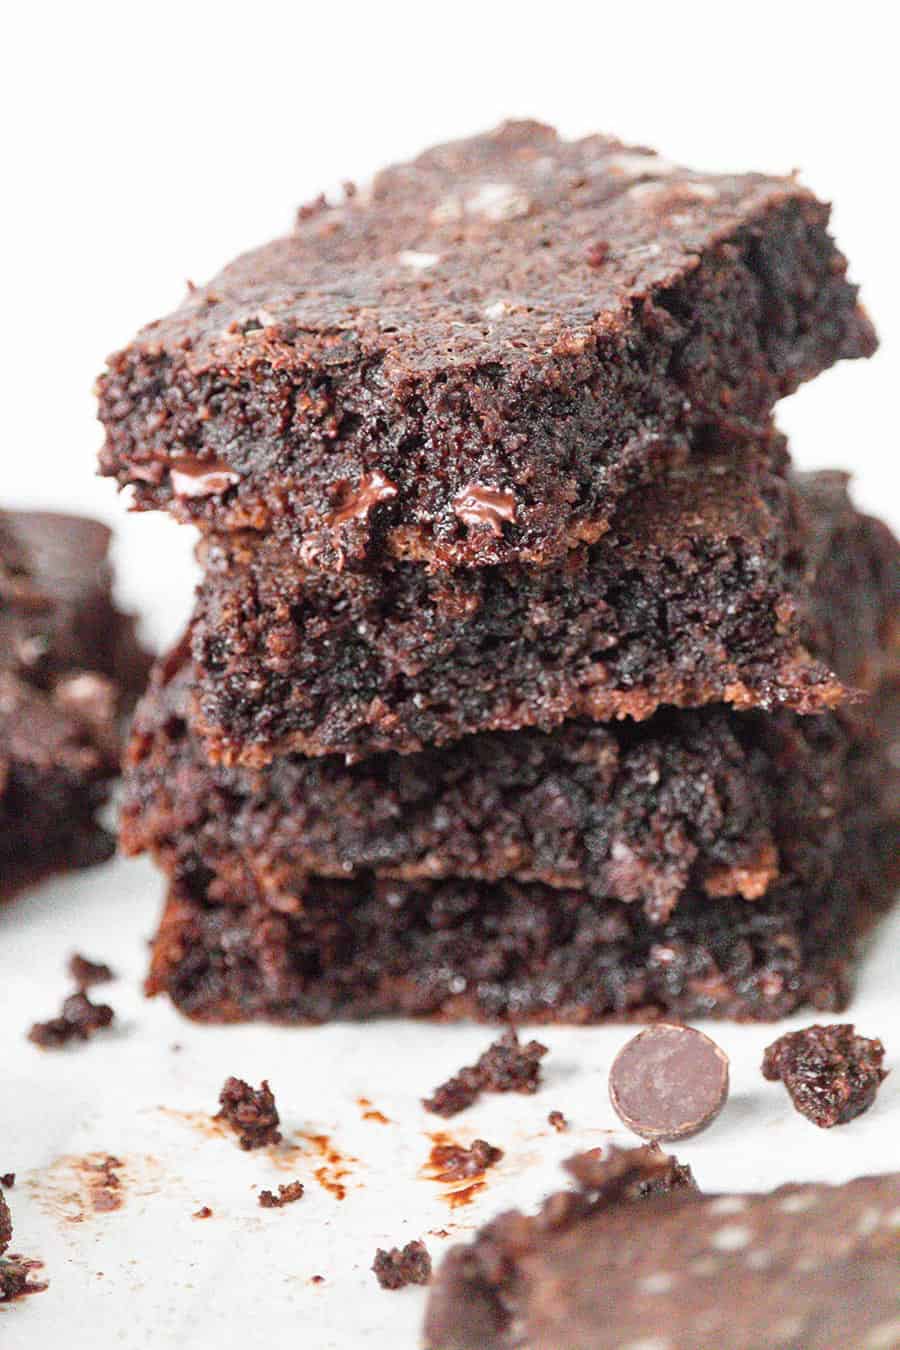 A stack of fudgy keto brownies with crumbs and chocolate chips strewn around.